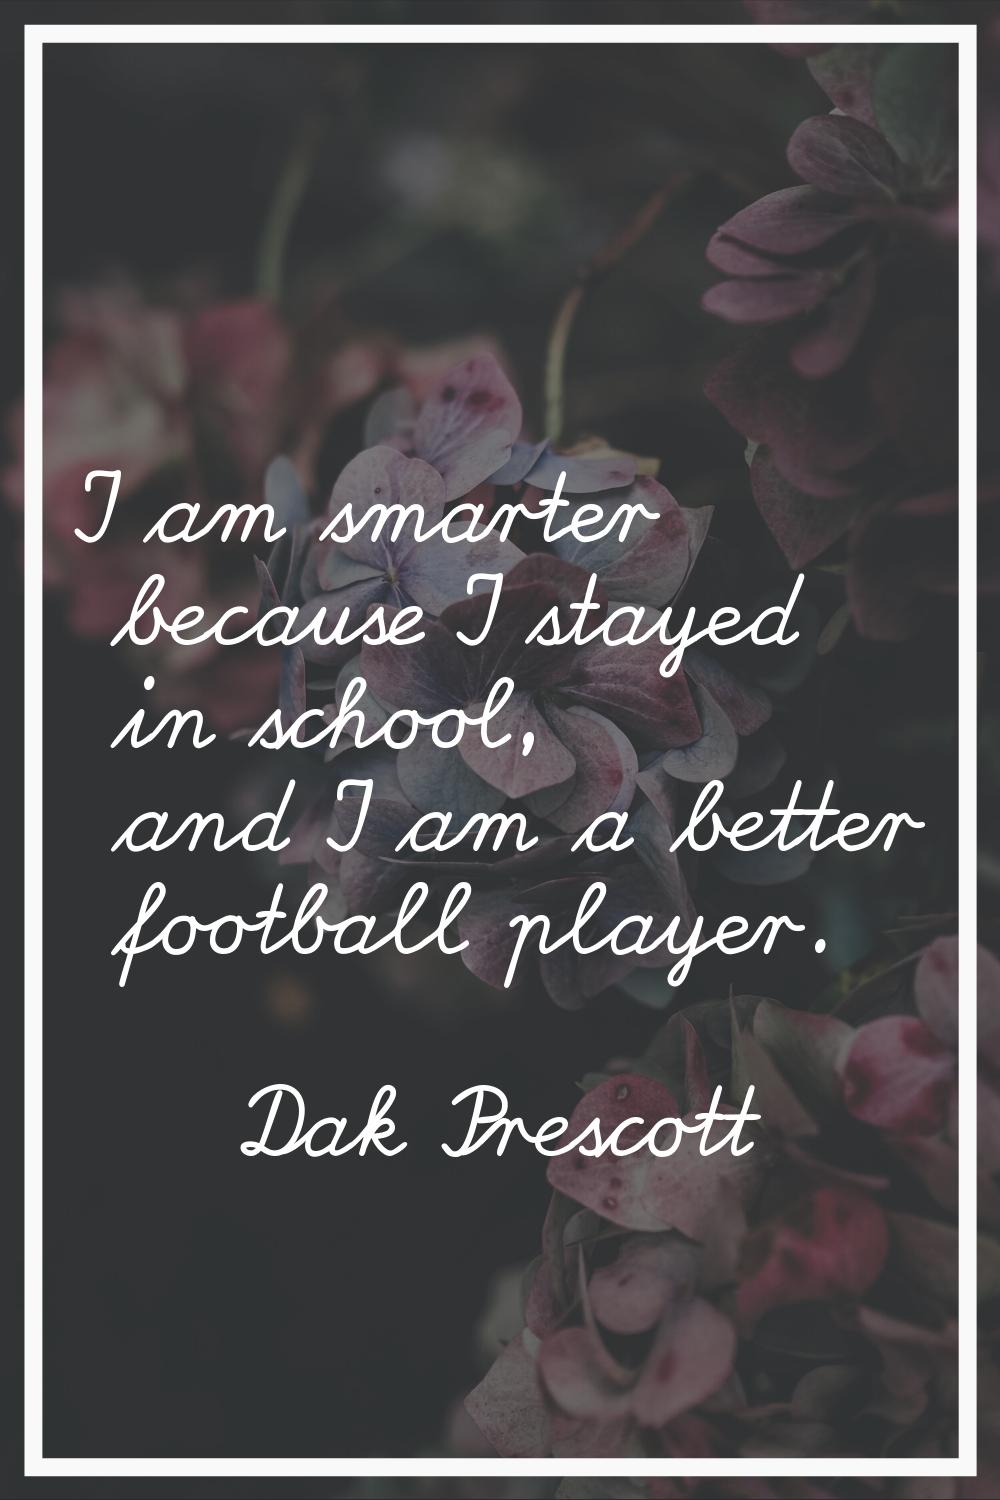 I am smarter because I stayed in school, and I am a better football player.